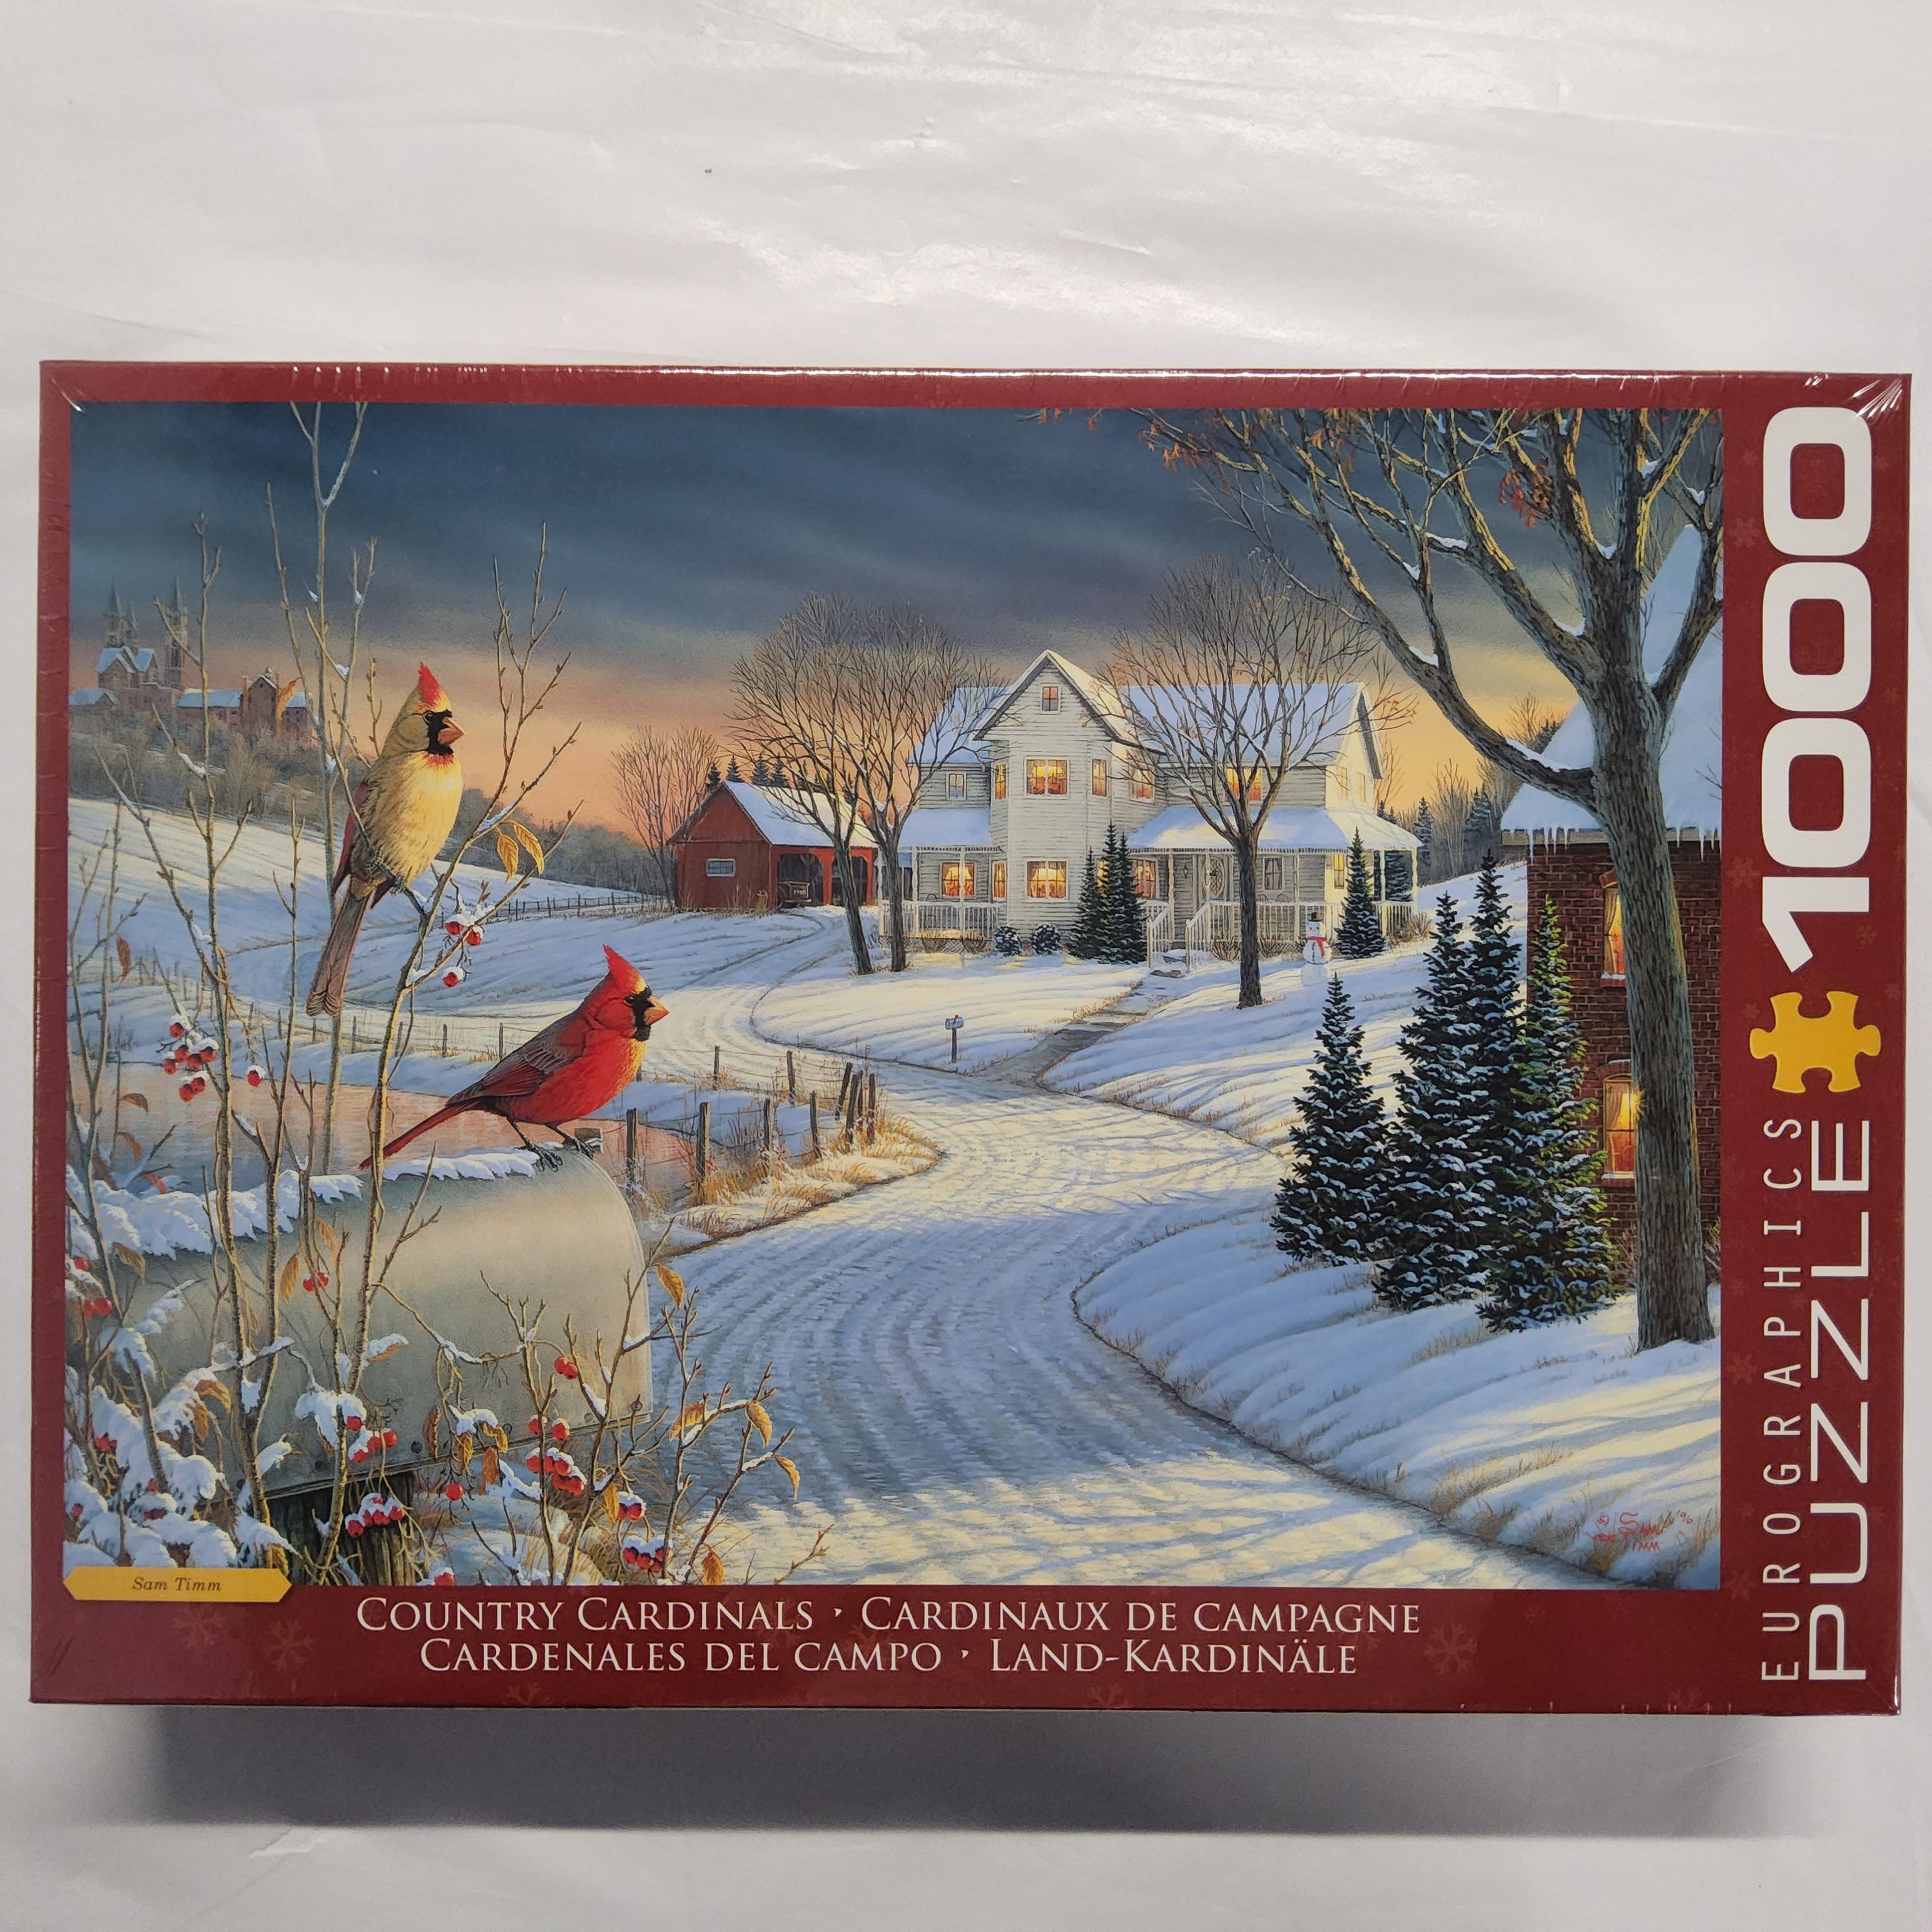 Eurographics Puzzle - Country Cardinals - 1000 pieces - 6000-0981